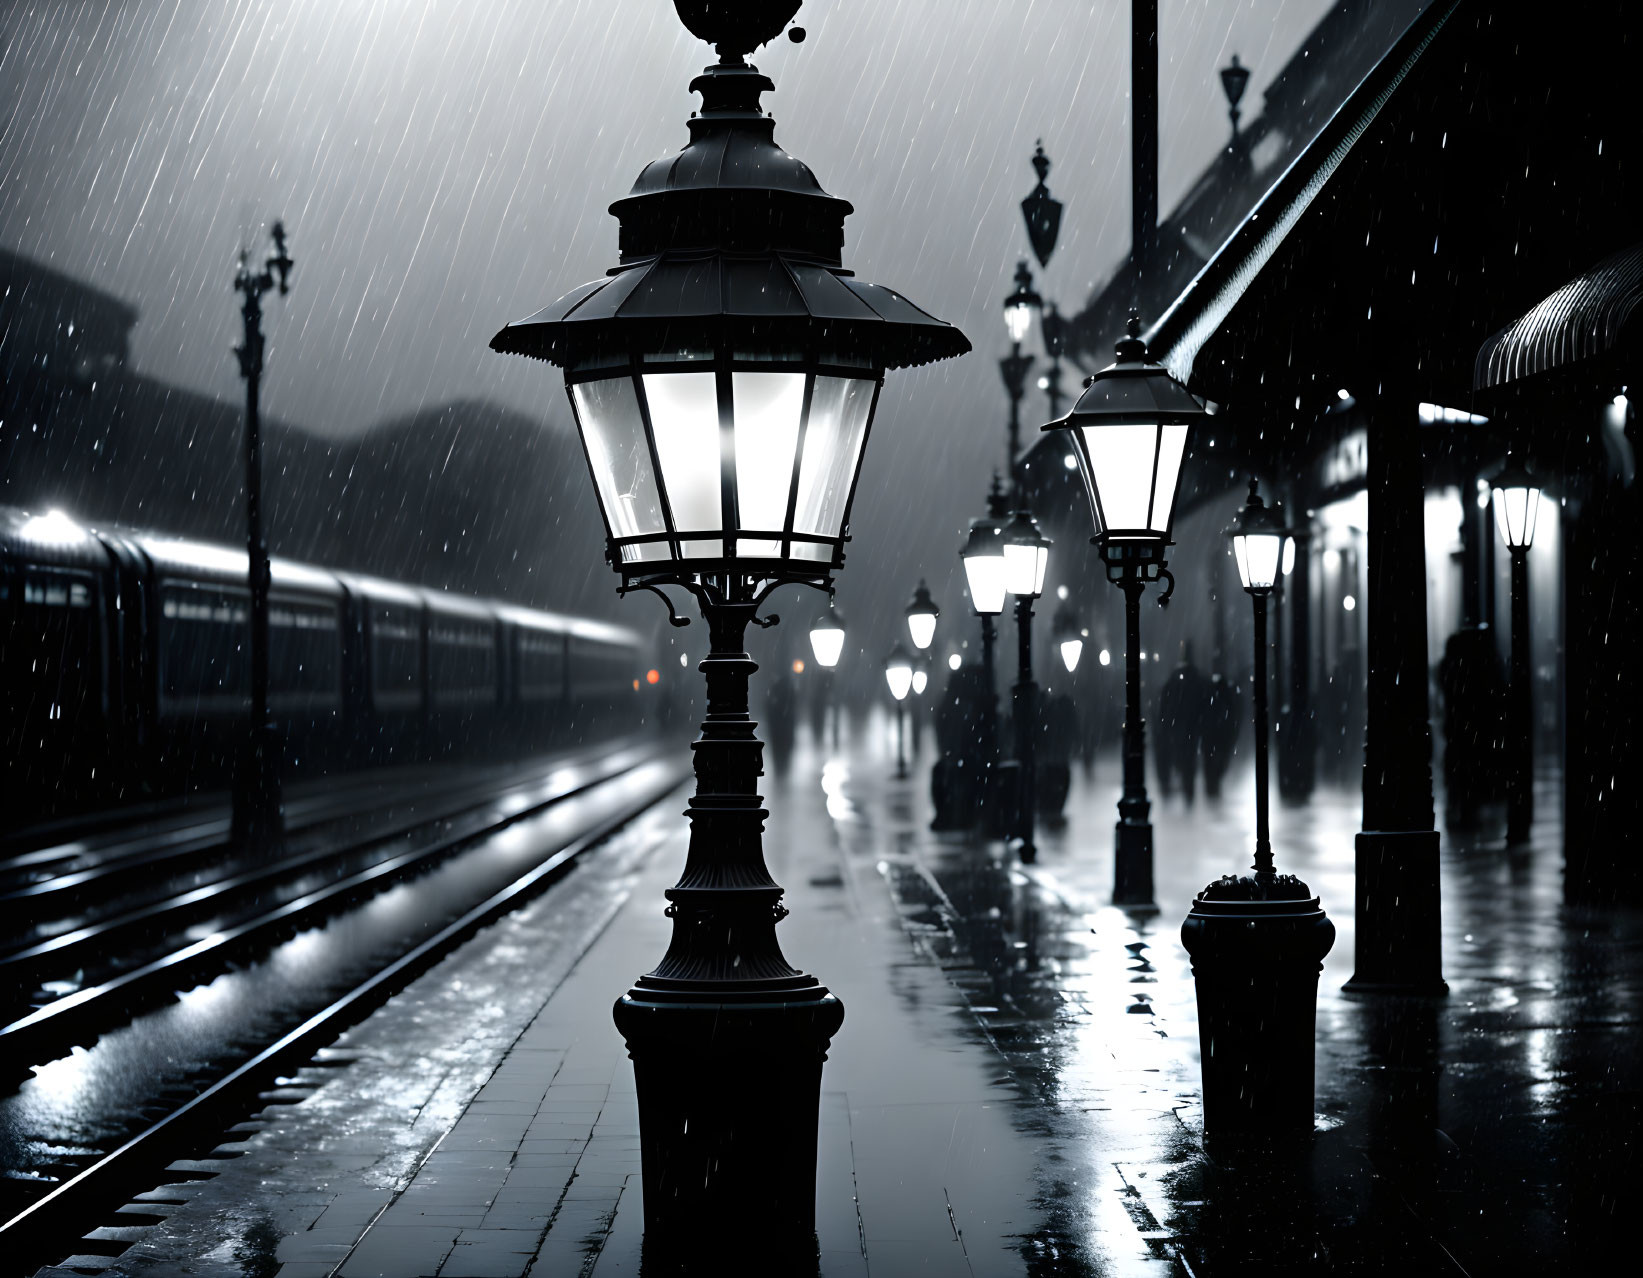 Nighttime rain-soaked train platform with glowing lampposts and departing train